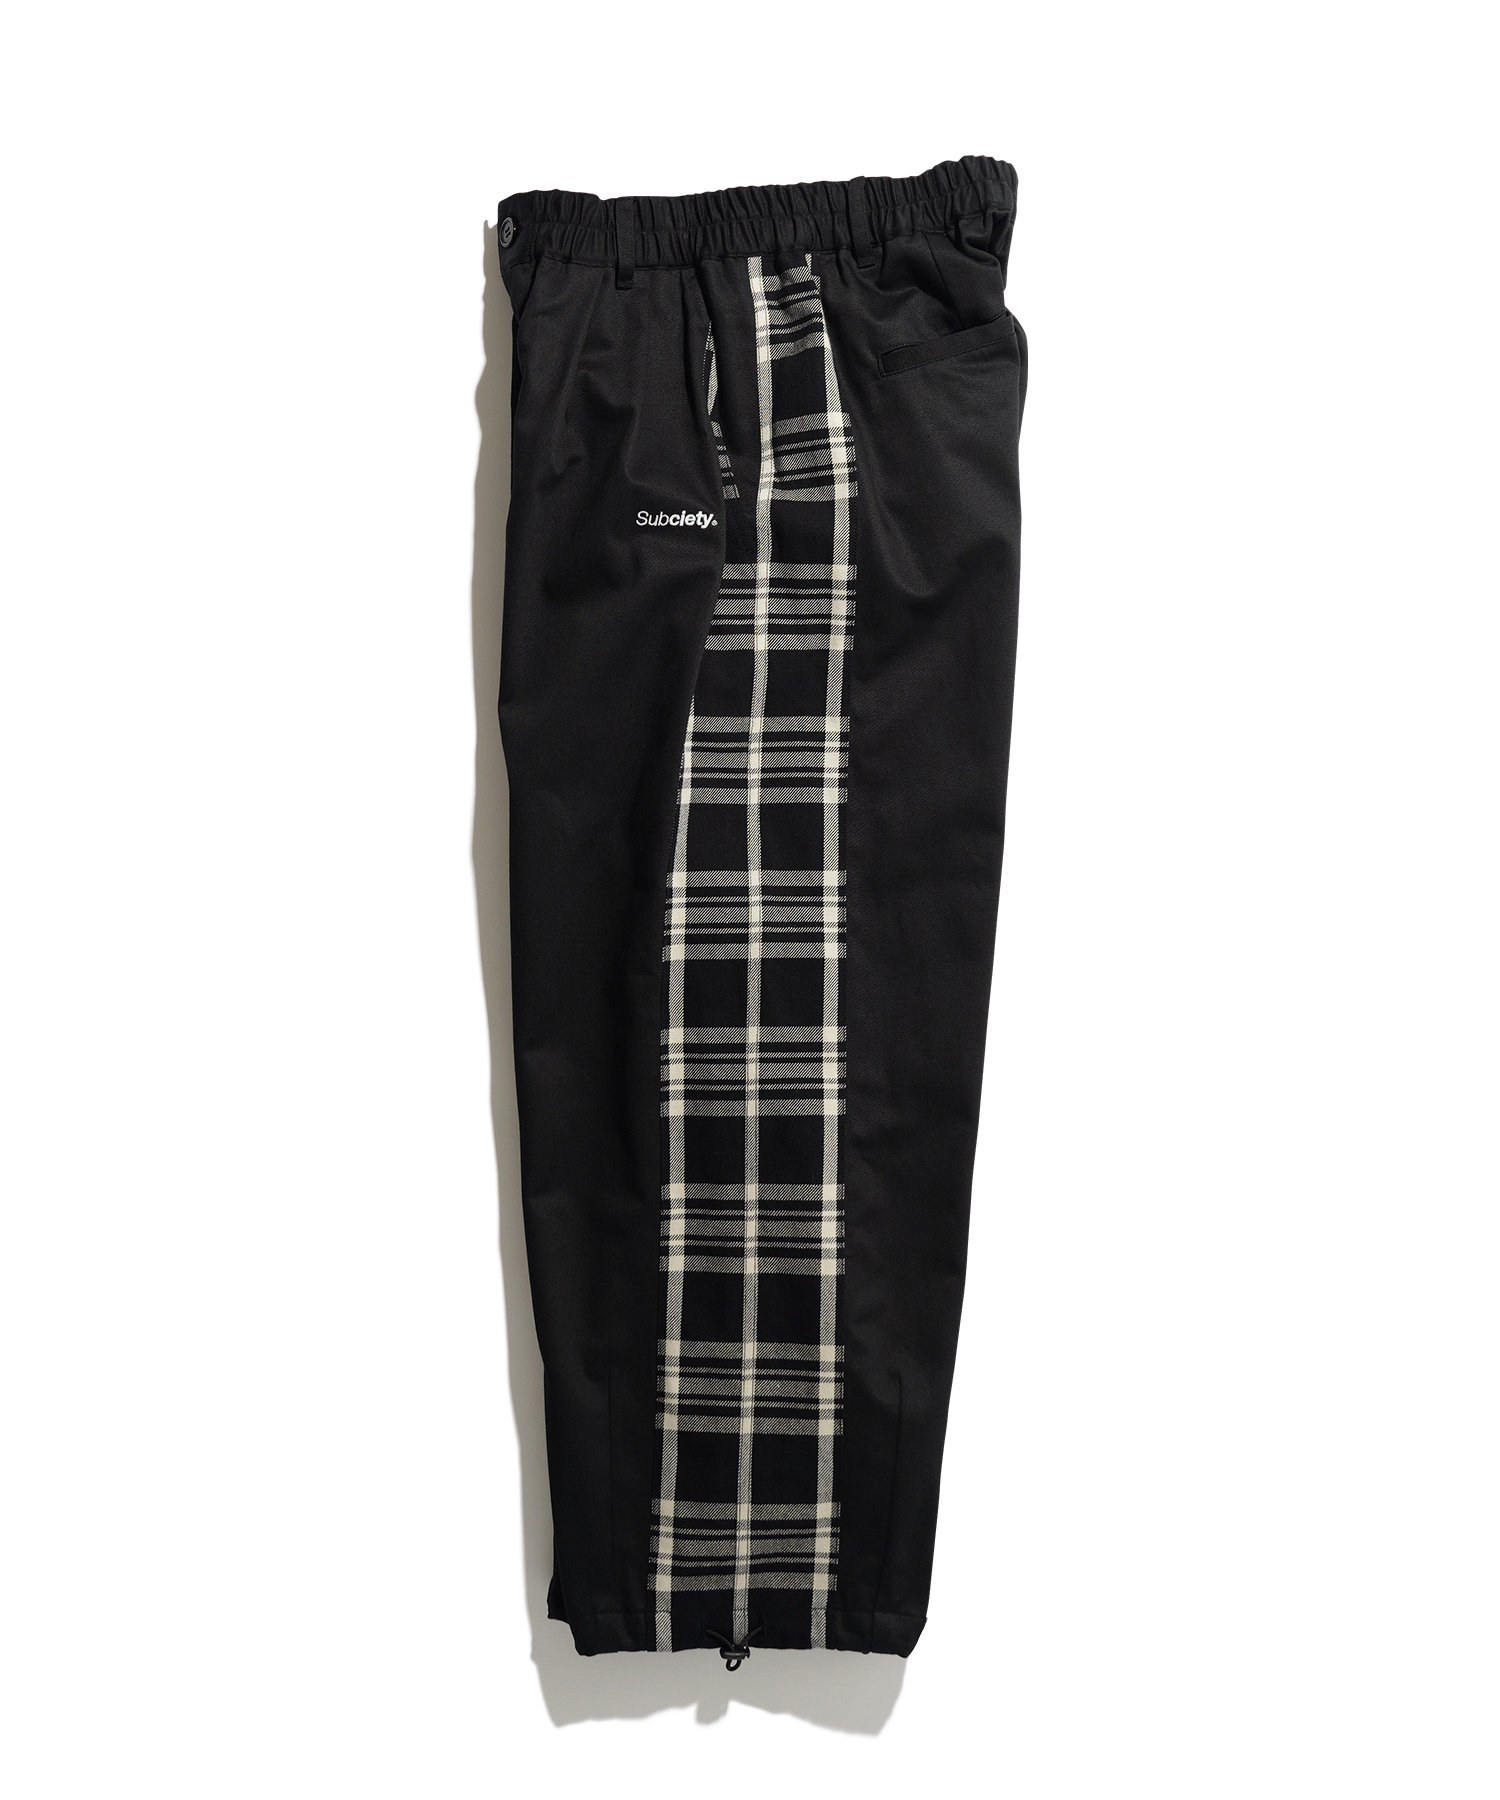 CHECK LINE BAGGY PANTS - Subciety Online Store